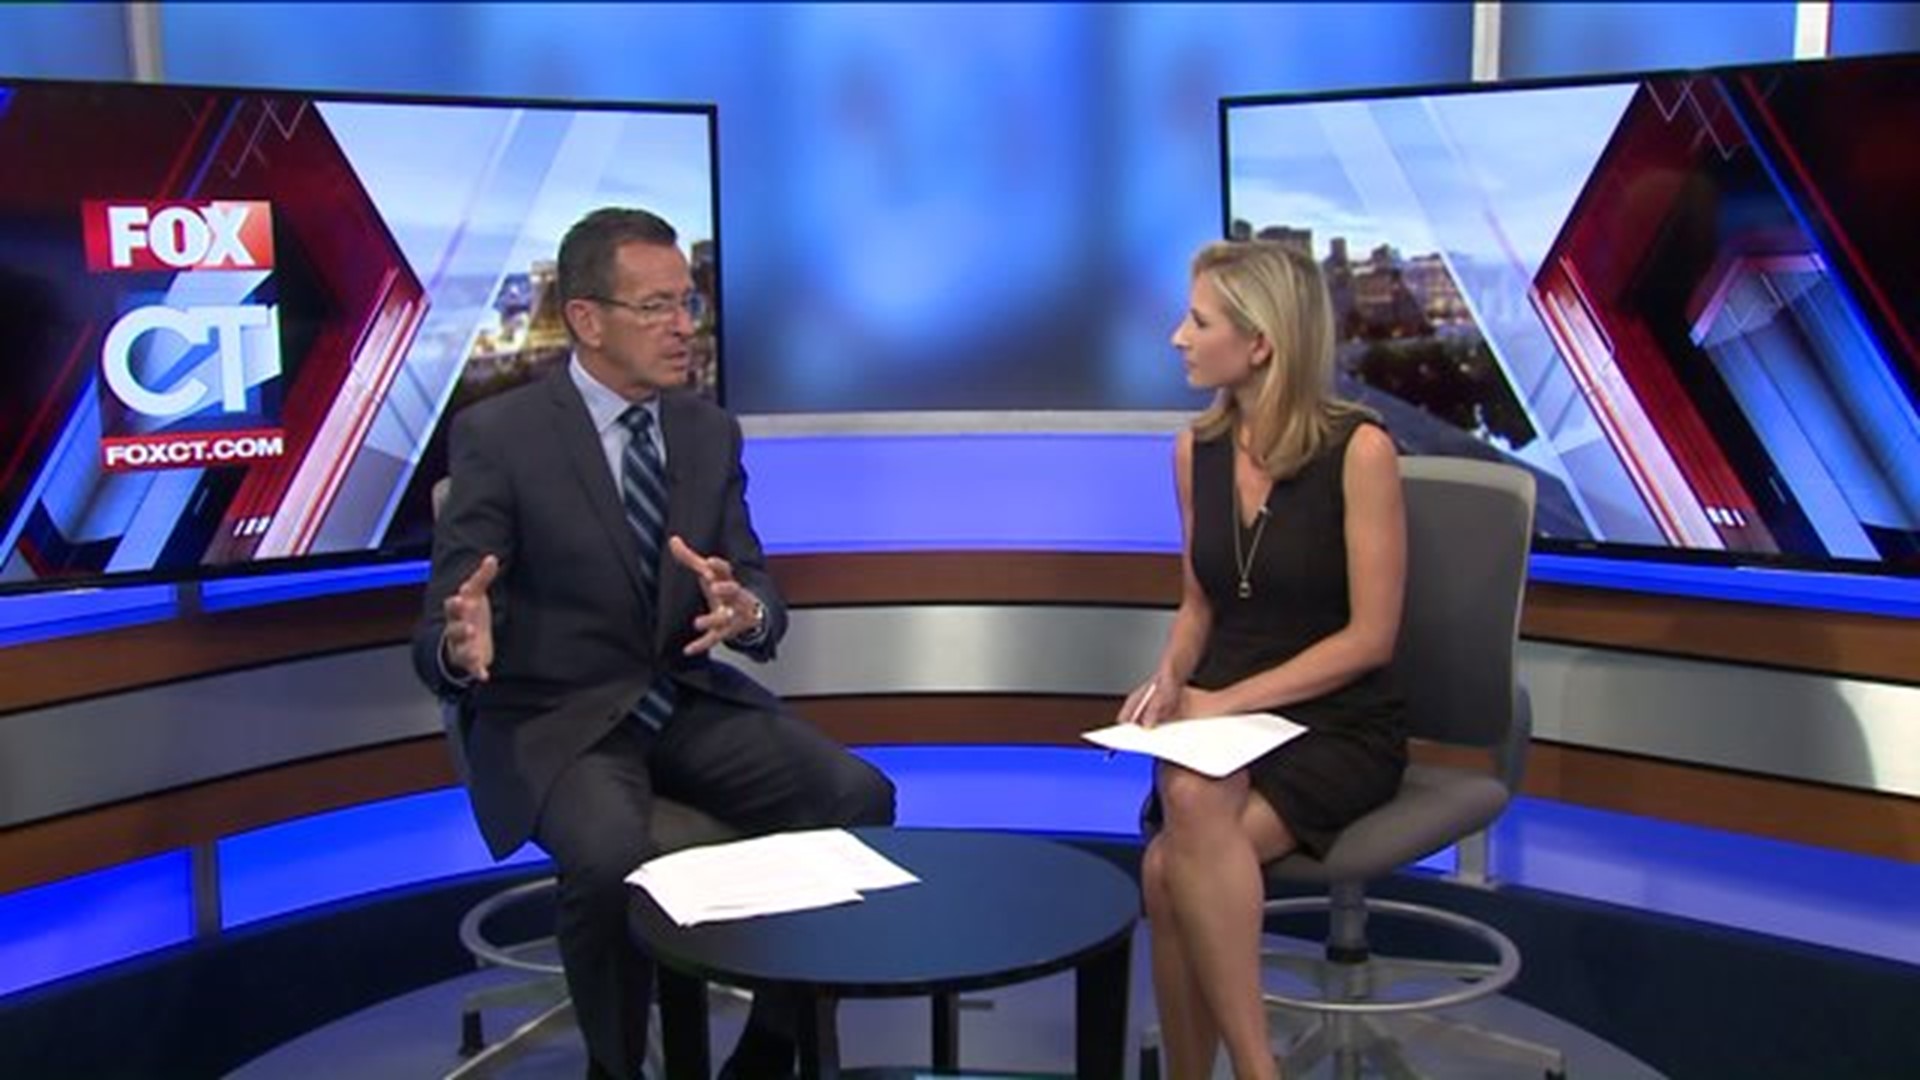 Gov. Malloy discusses jobs, possible GE relocation